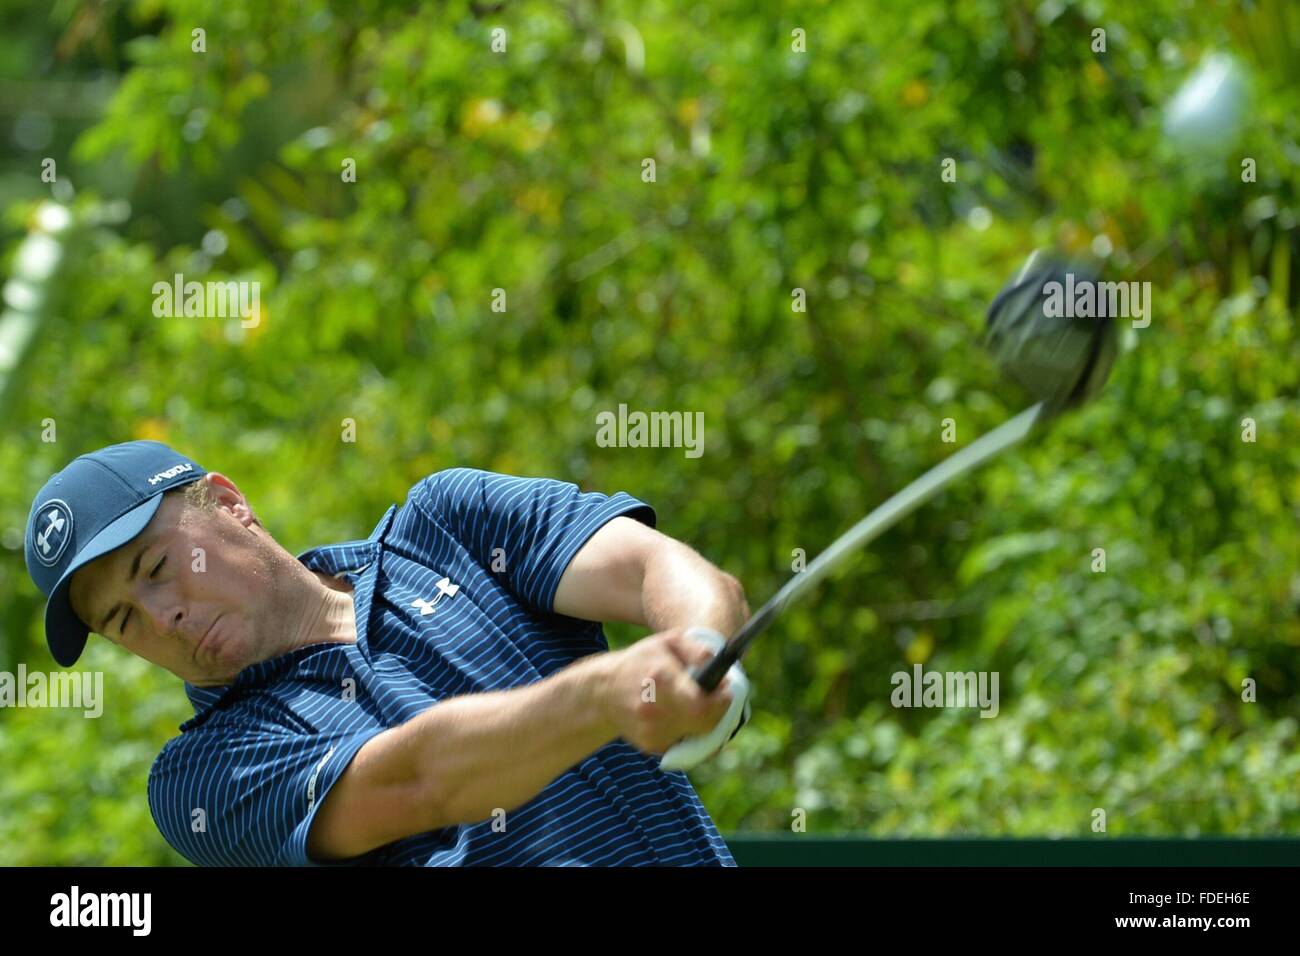 Singapore. 31st Jan, 2016. Jordan Spieth of the United States tees off during the SMBC Singapore Open held at Singapore's Sentosa Golf Club Serapong course, Jan. 31, 2016. © Then Chih Wey/Xinhua/Alamy Live News Stock Photo